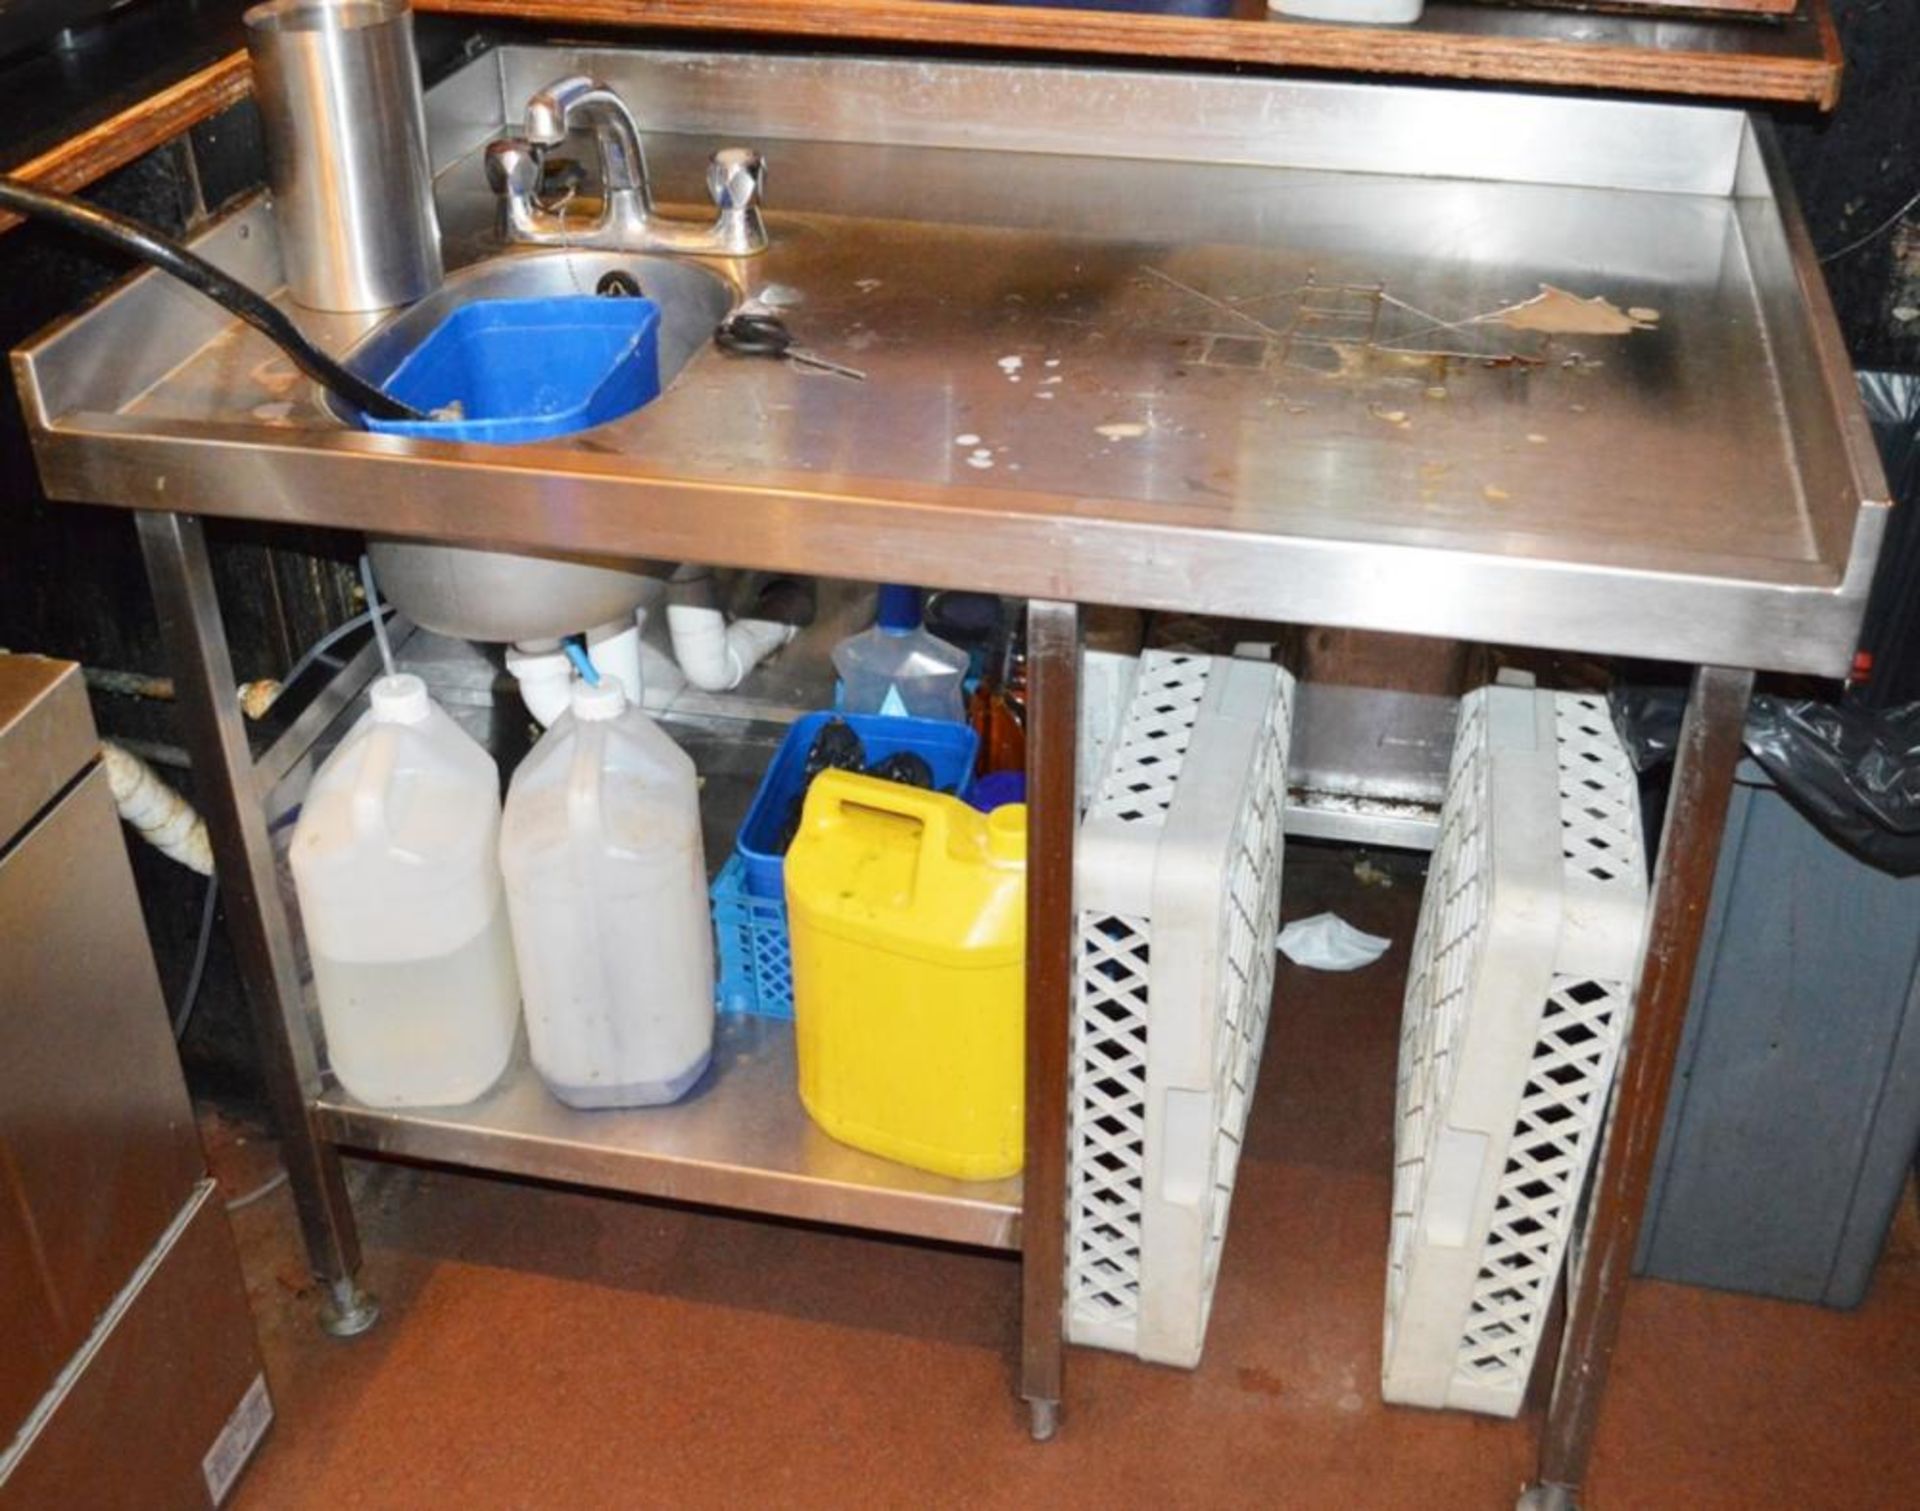 1 x Stainless Prep Bench With Undershelf, Sink Basin and Mixer Tap - H85 x W110 x D75 cms - Ref FB11